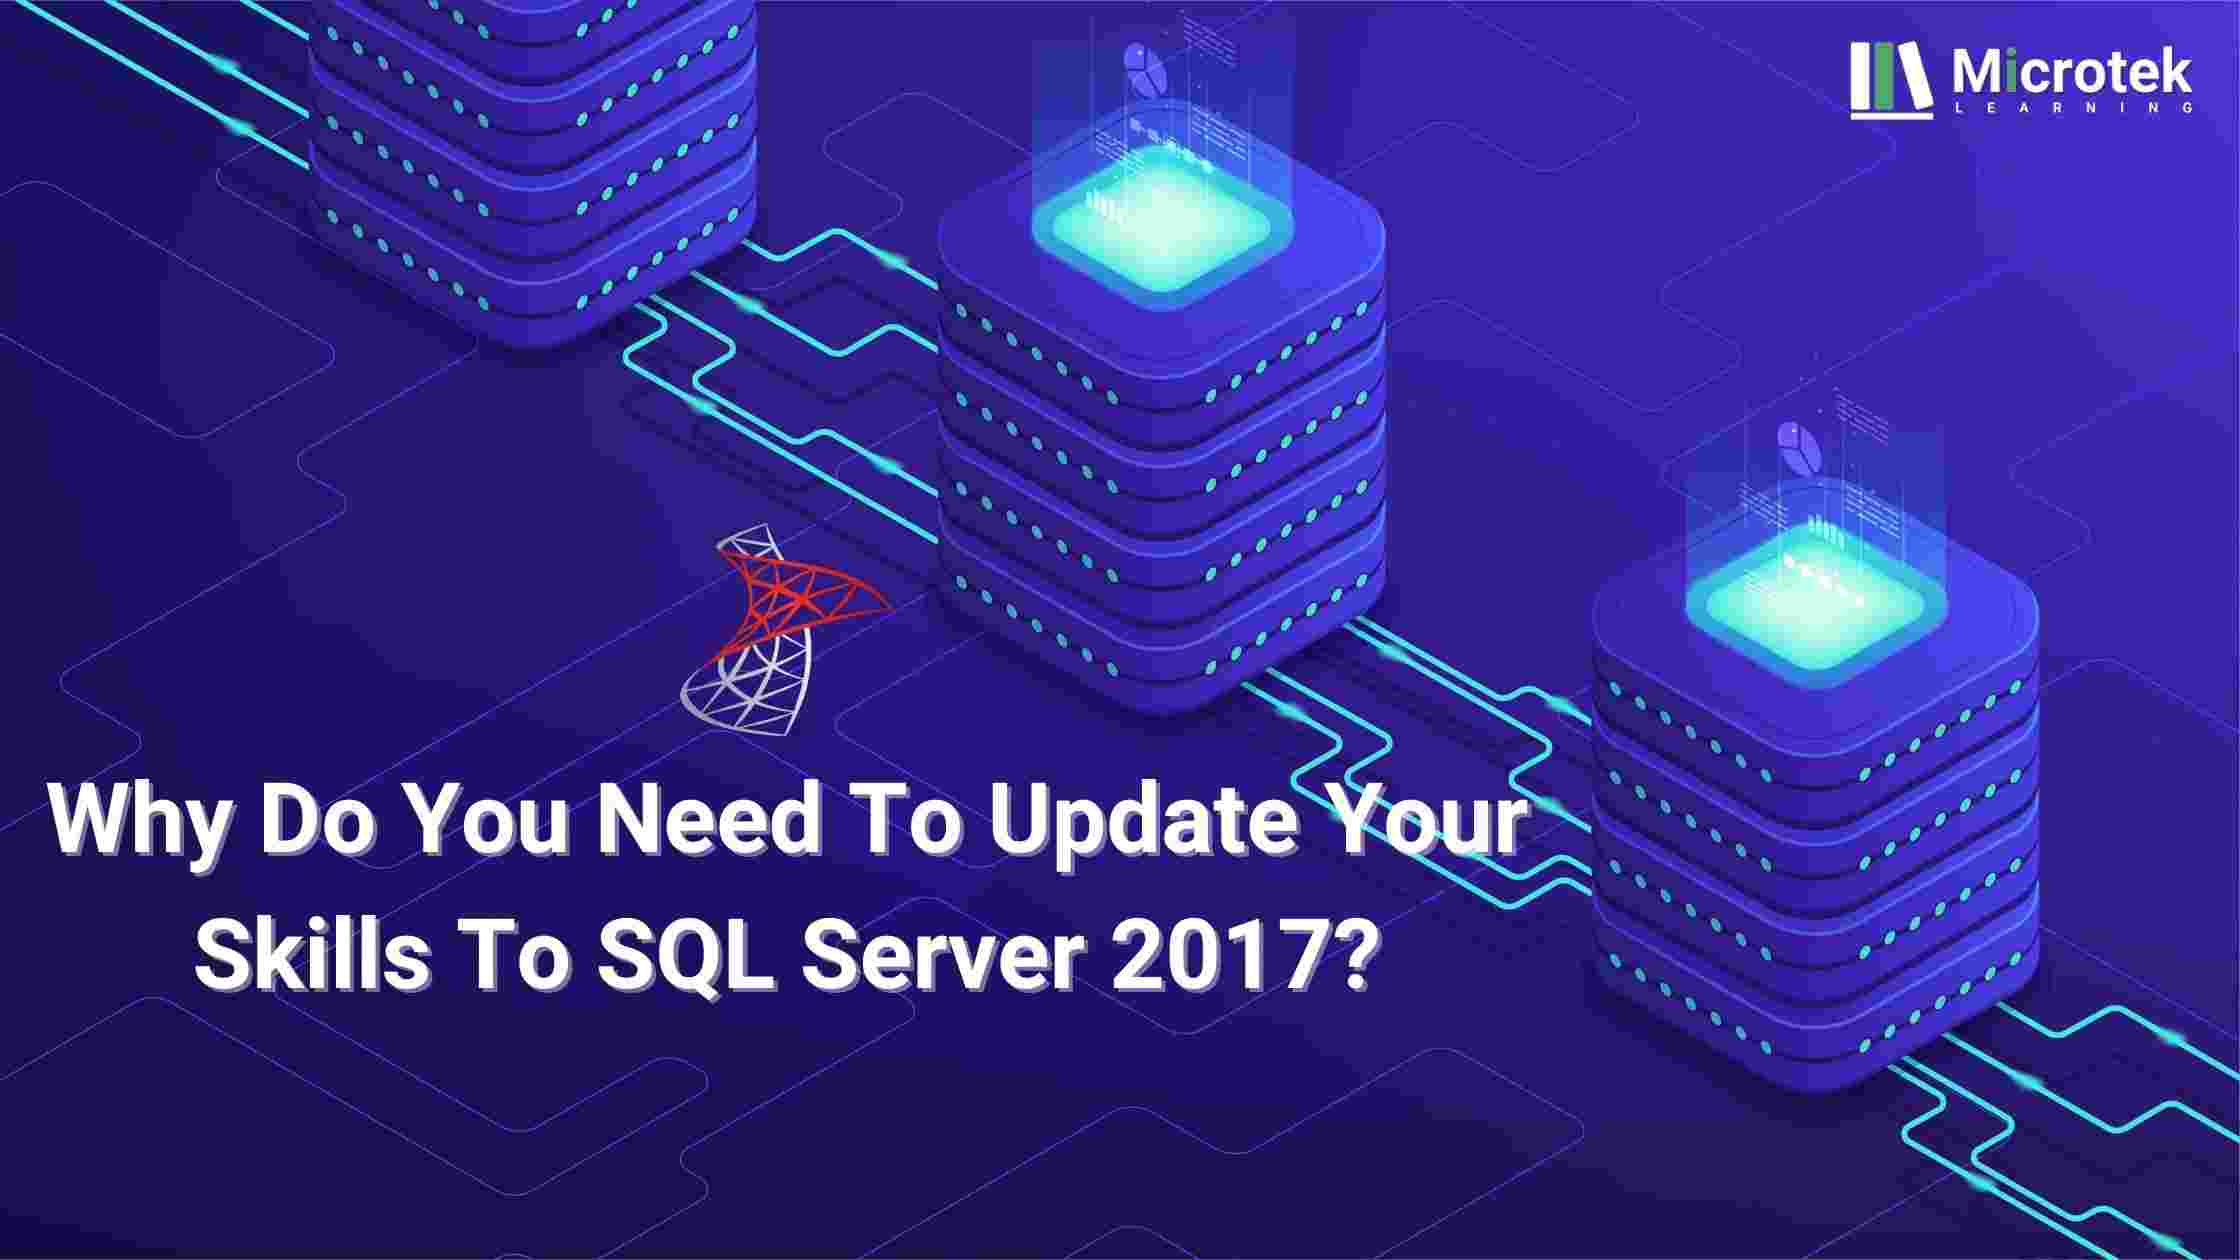 Update Your Skills To SQL Server 2017